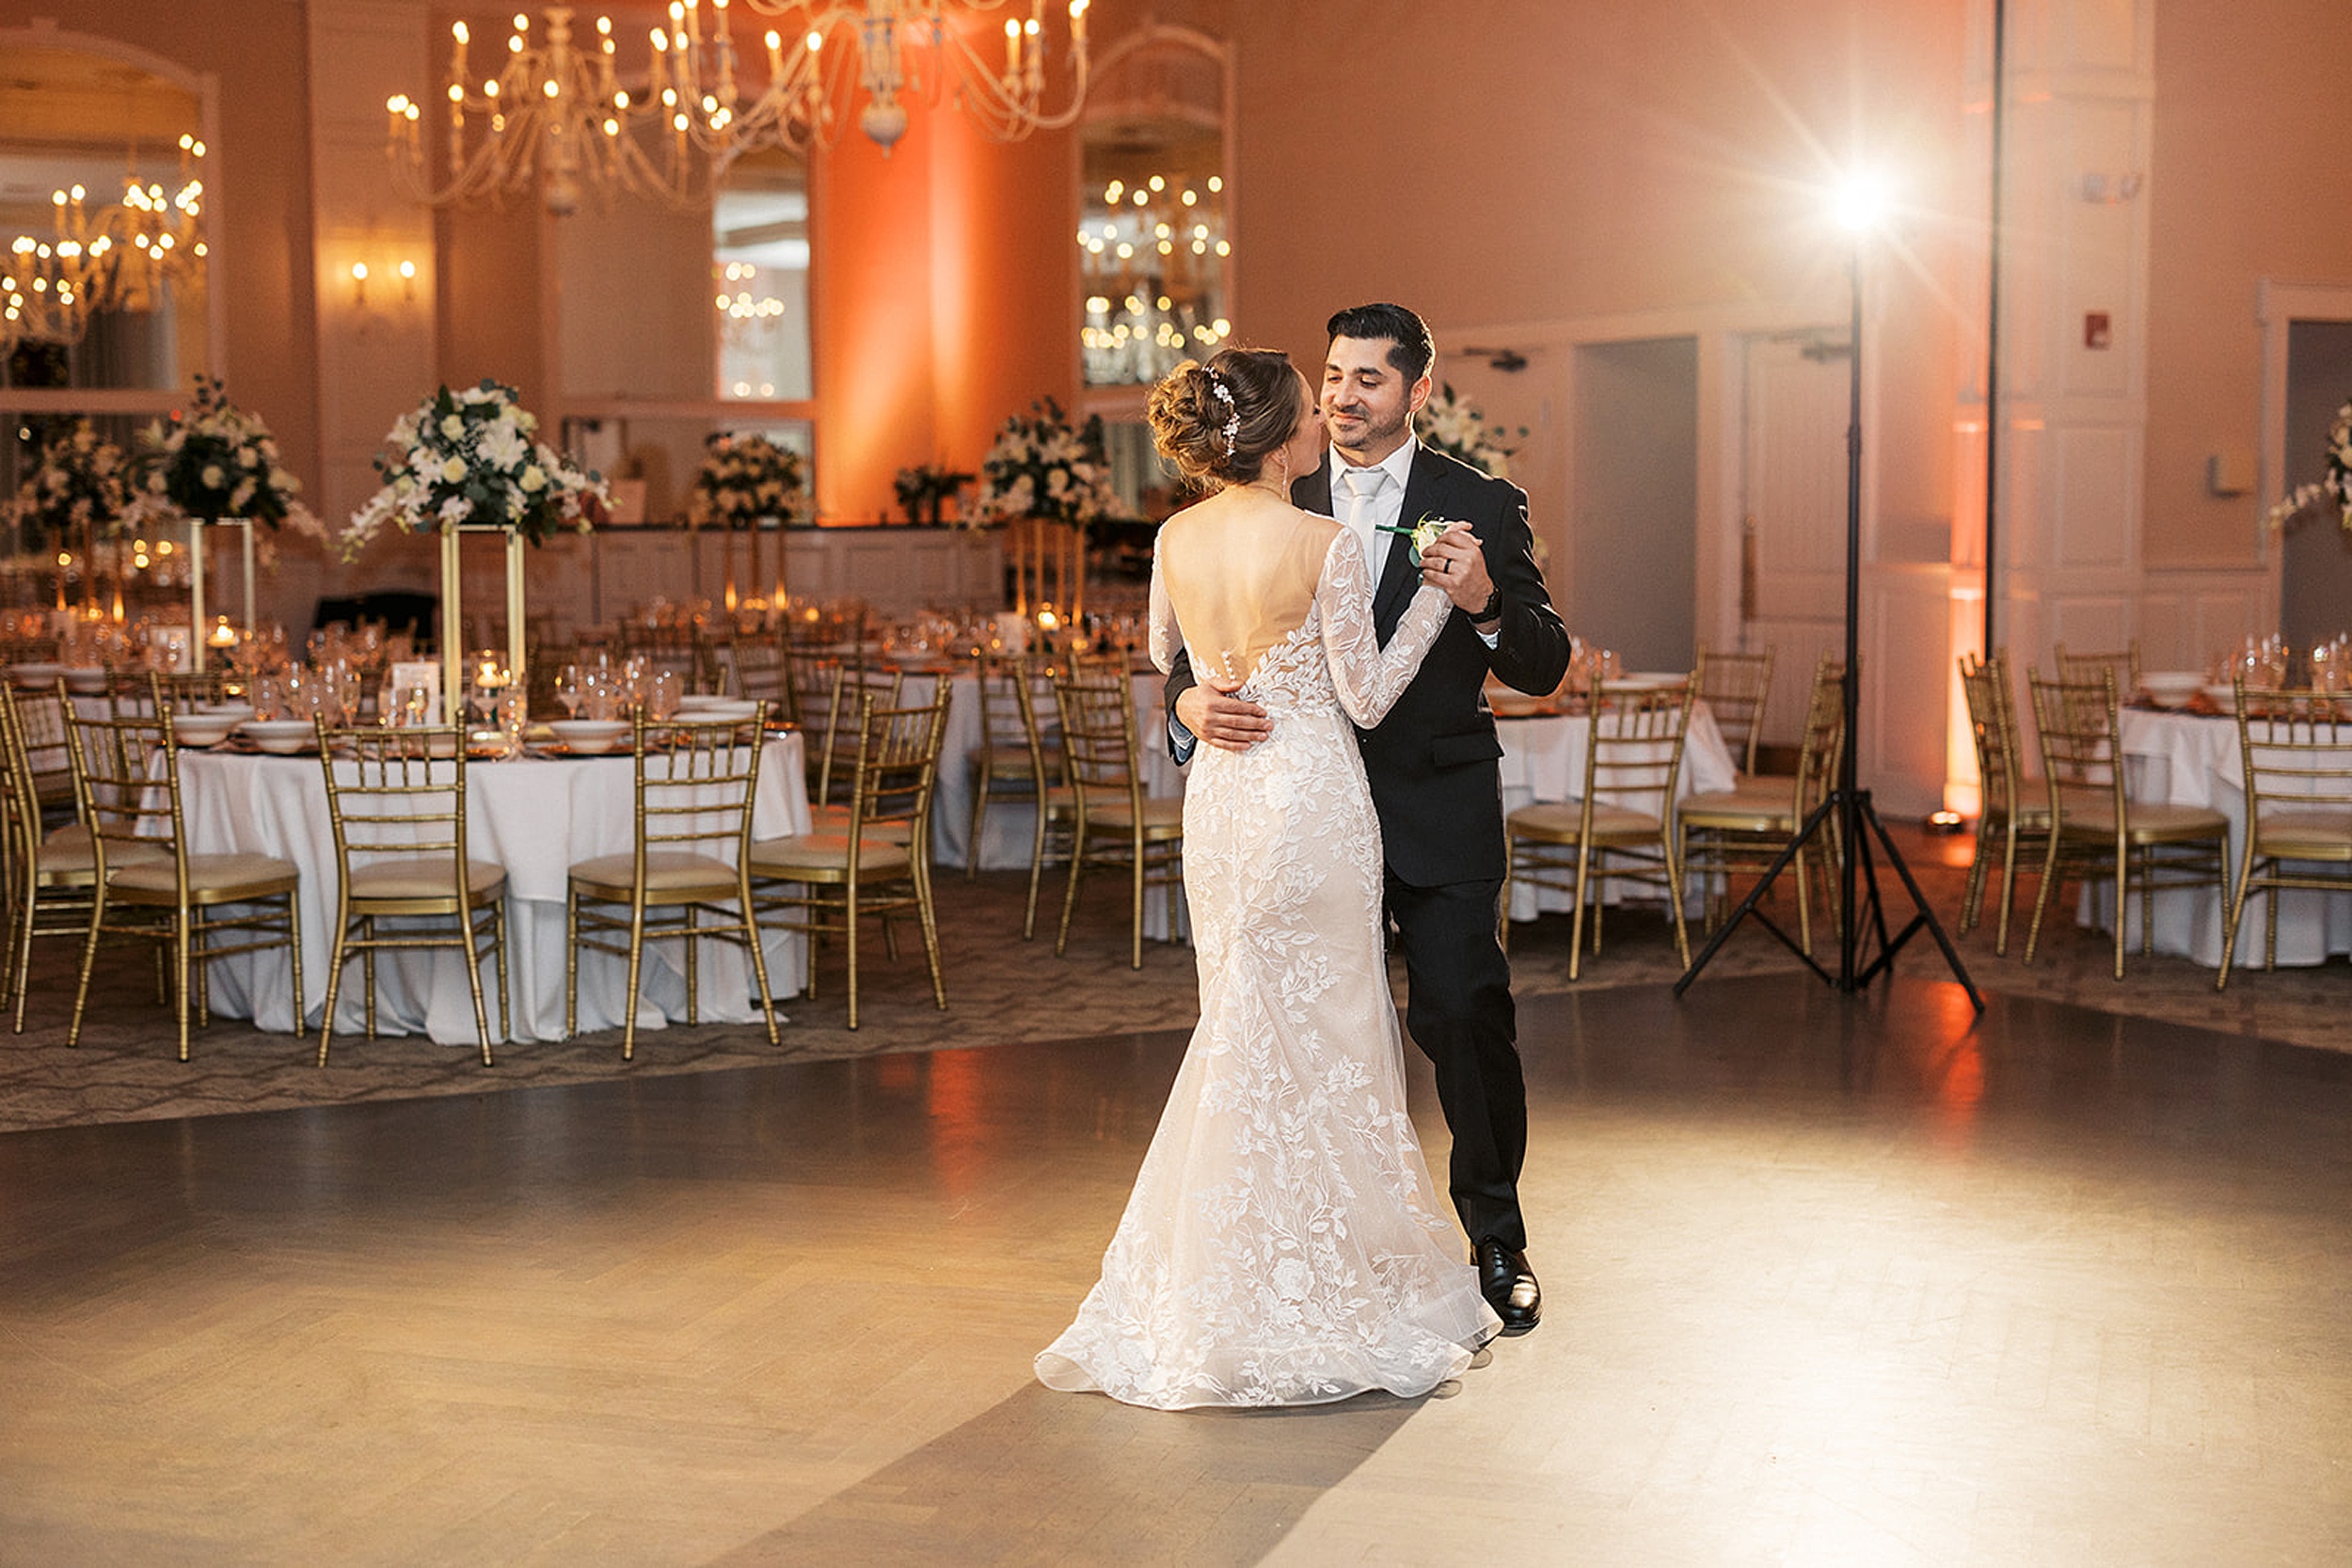 Newlyweds dance on the dance floor alone in the reception hall at a Crystal Springs Wedding